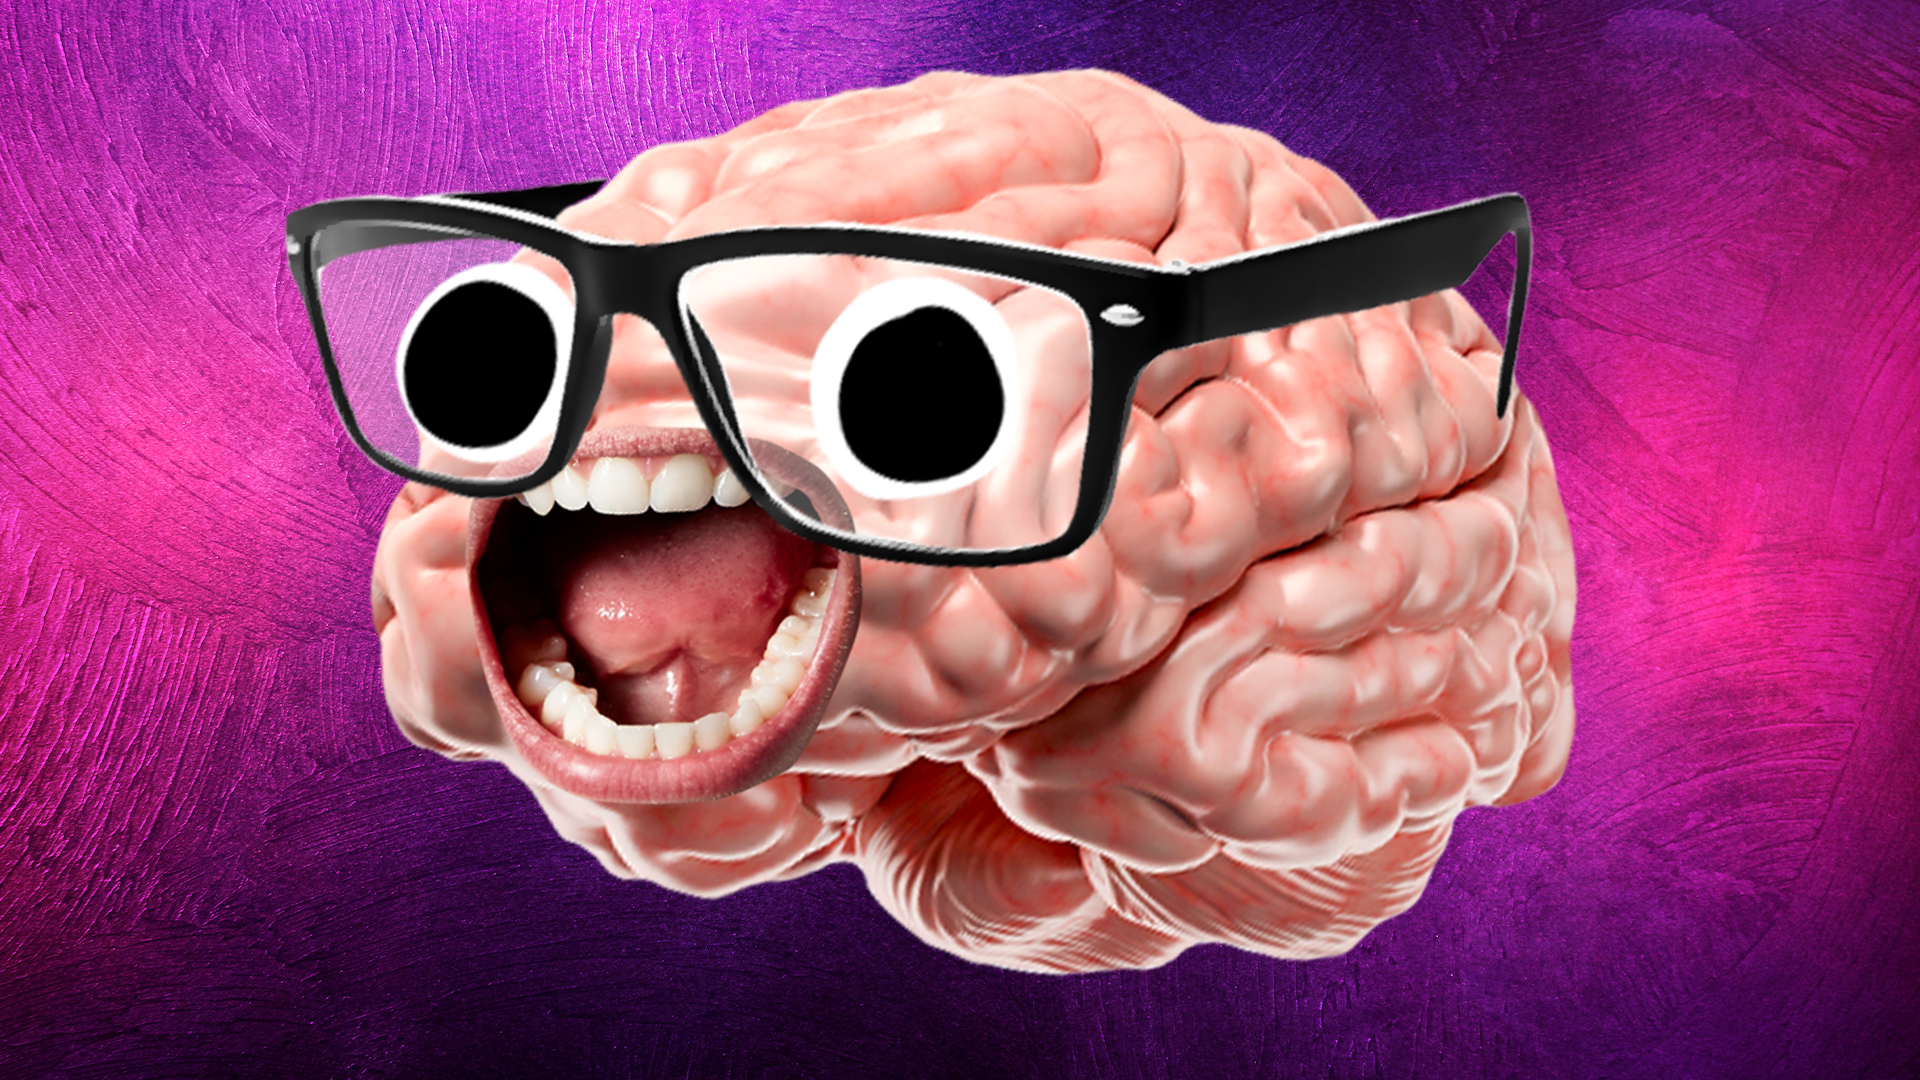 Brain in glasses grinning on purple background